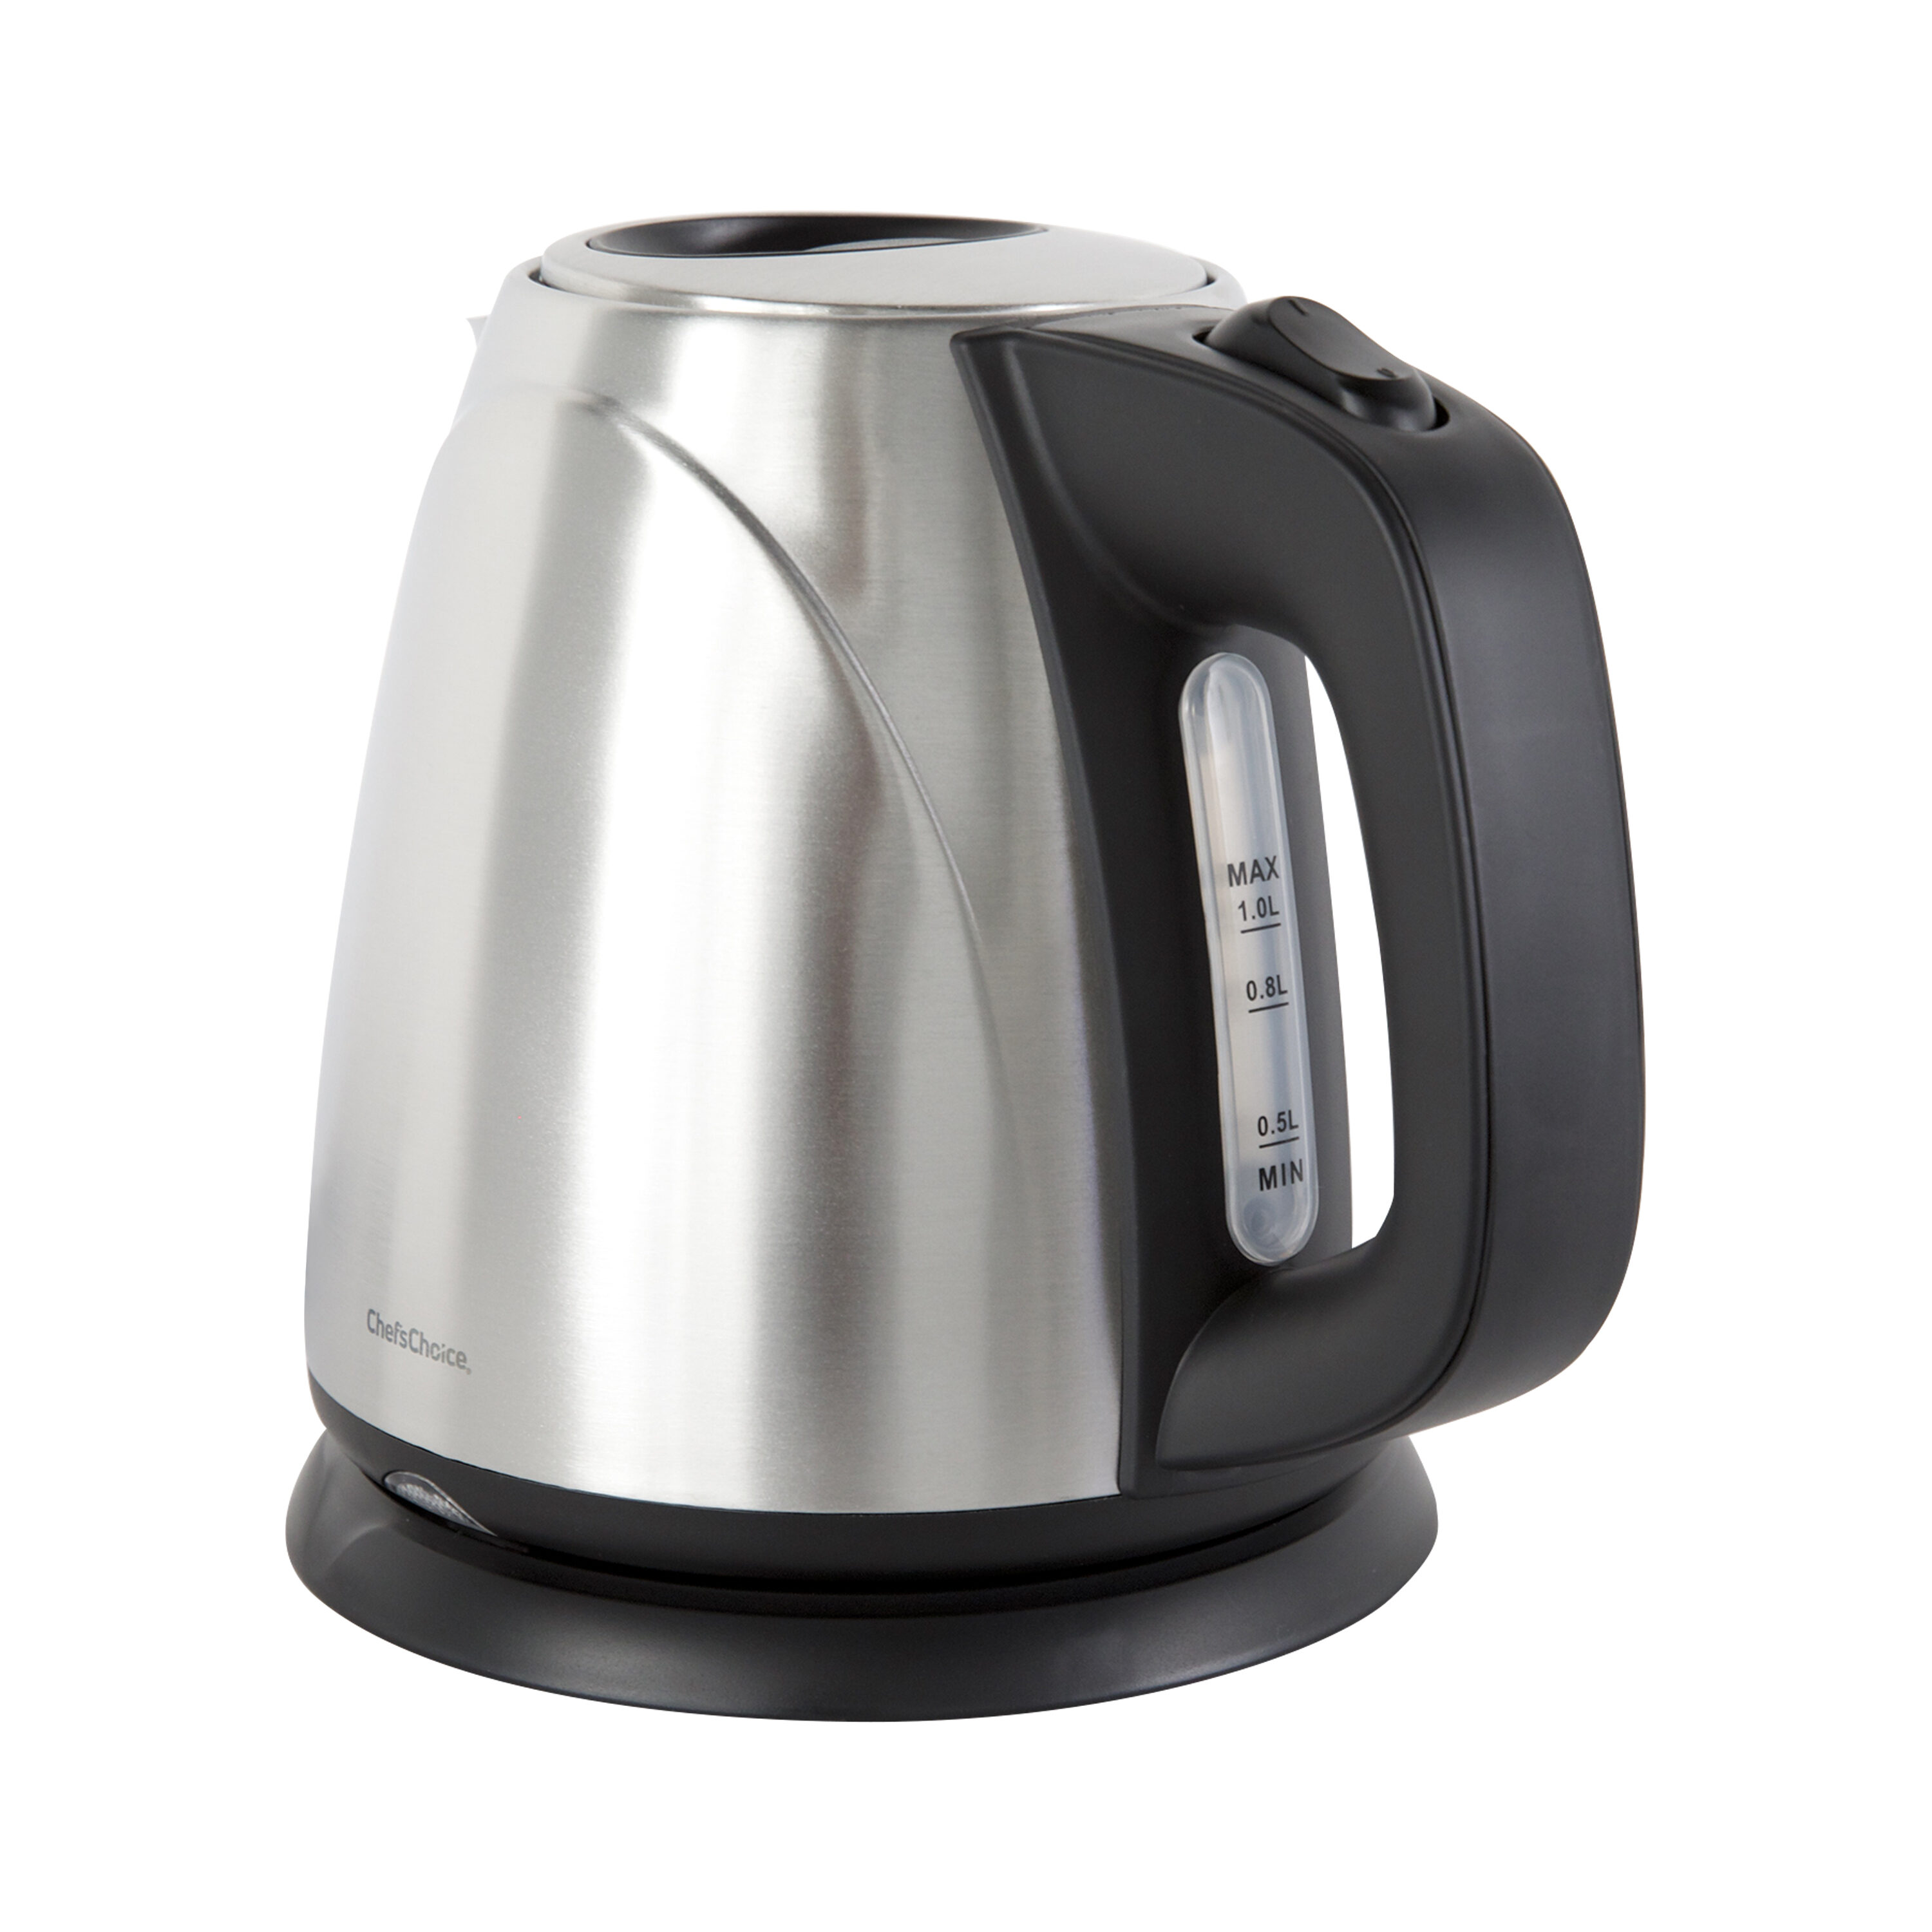  Better Chef Cordless Electric Kettle